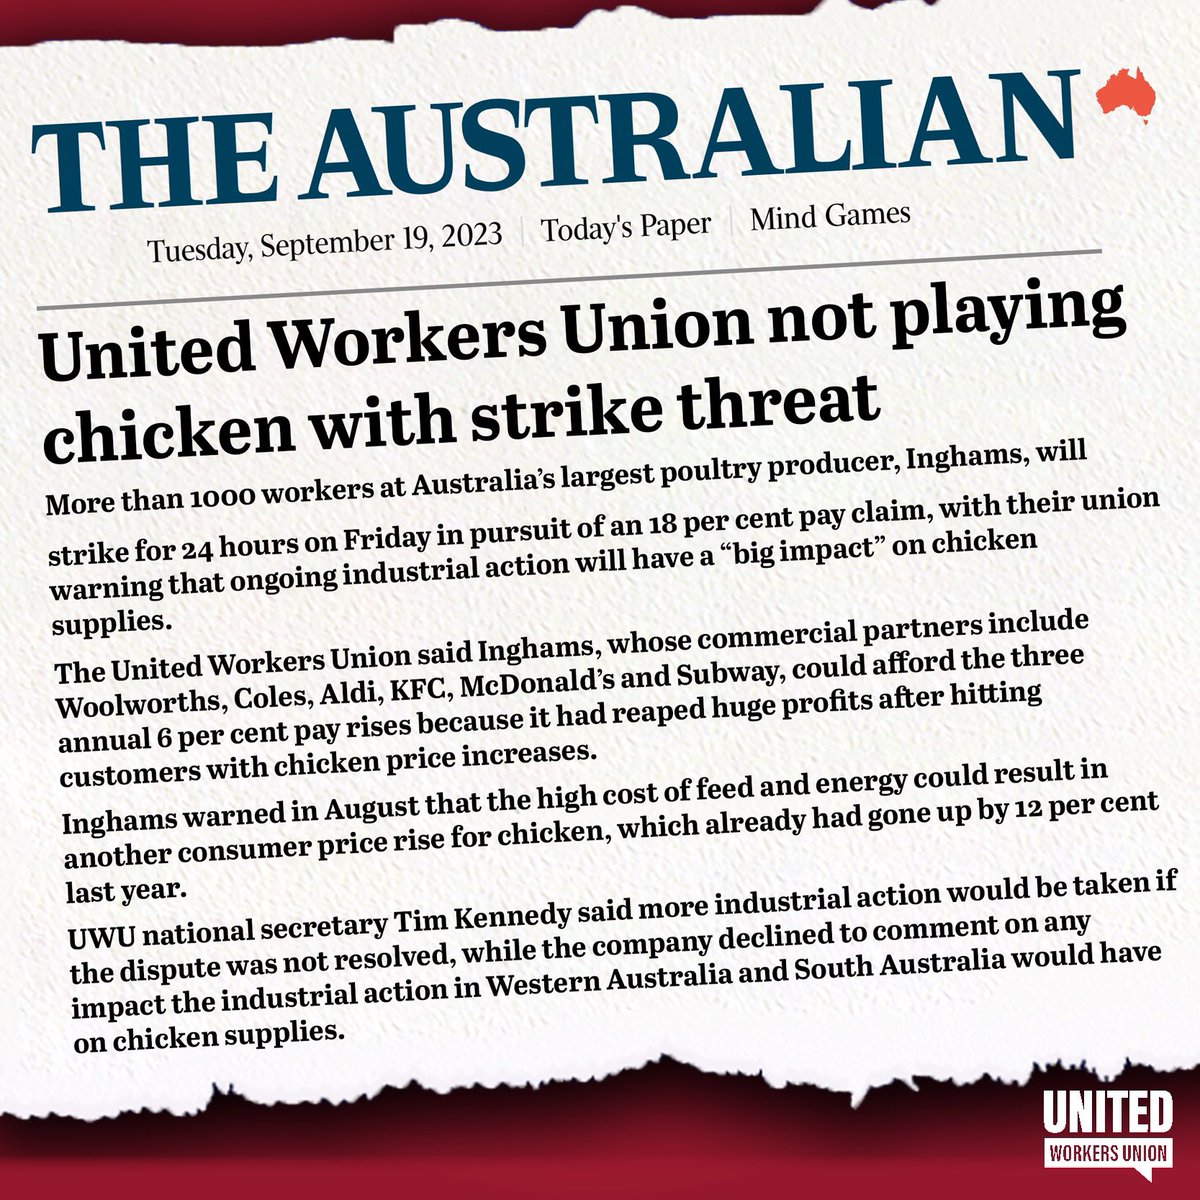 More than 1000 workers at our largest poultry producer, Inghams, will strike this Friday to win a fair pay rise. Despite Inghams soaring profits, many are only earning around $25 an hour. Read the full story (paywall): theaustralian.com.au/nation/united-… #ausunions #auspol